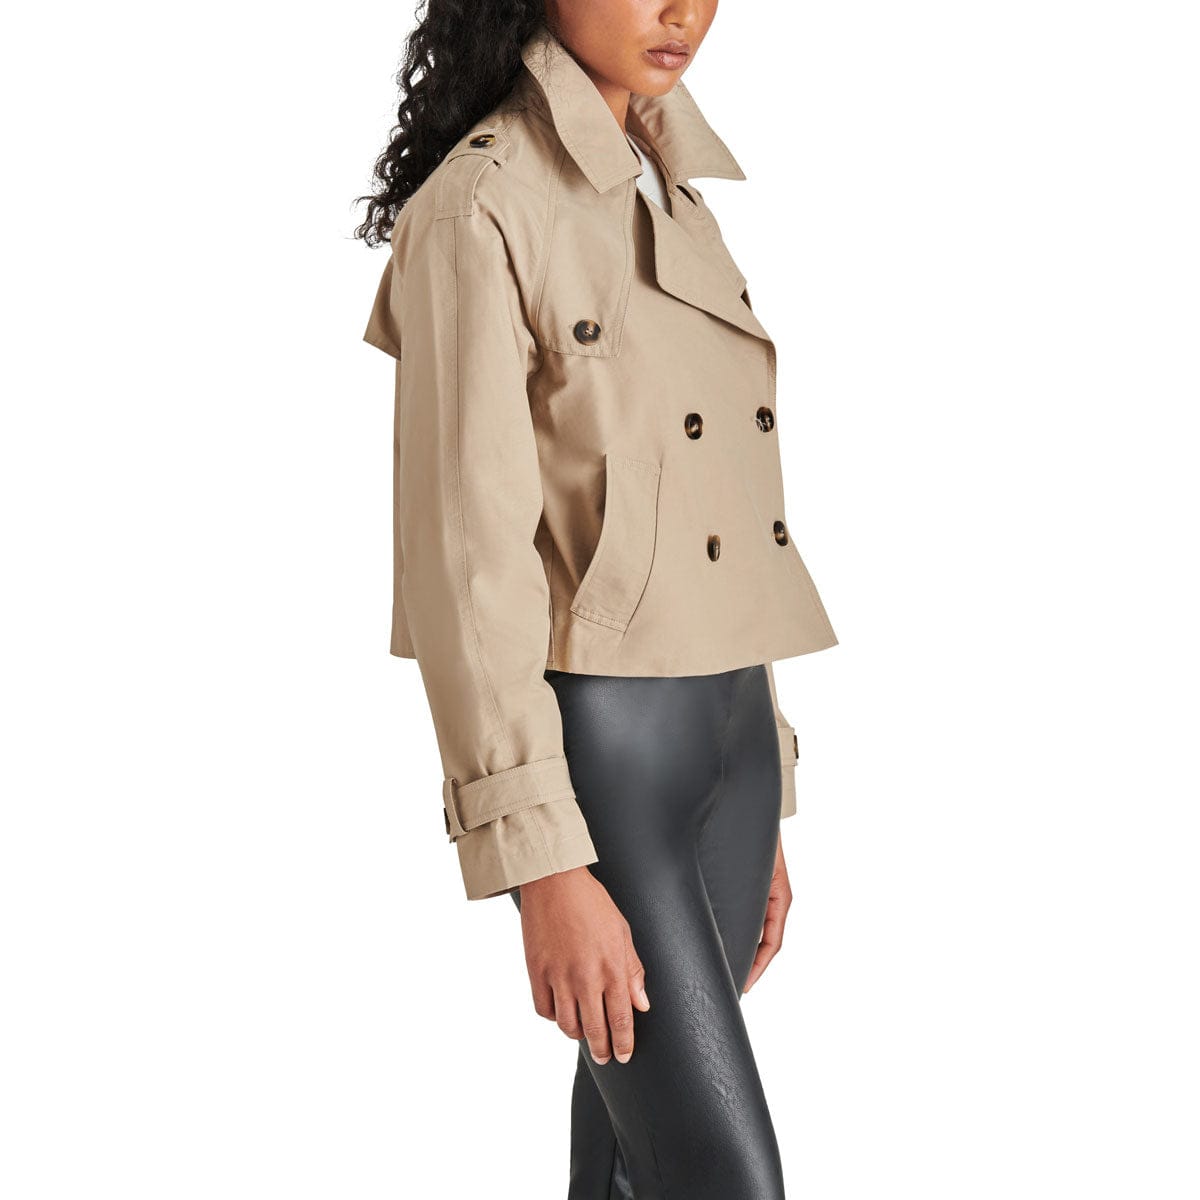 Steve Madden Sirus Cropped Double-Breasted Trench Jacket khaki side | MILK MONEY milkmoney.co | cute jackets for women, cute coats. cool jackets for women, stylish jackets for women, trendy jackets for women, trendy womens coats.